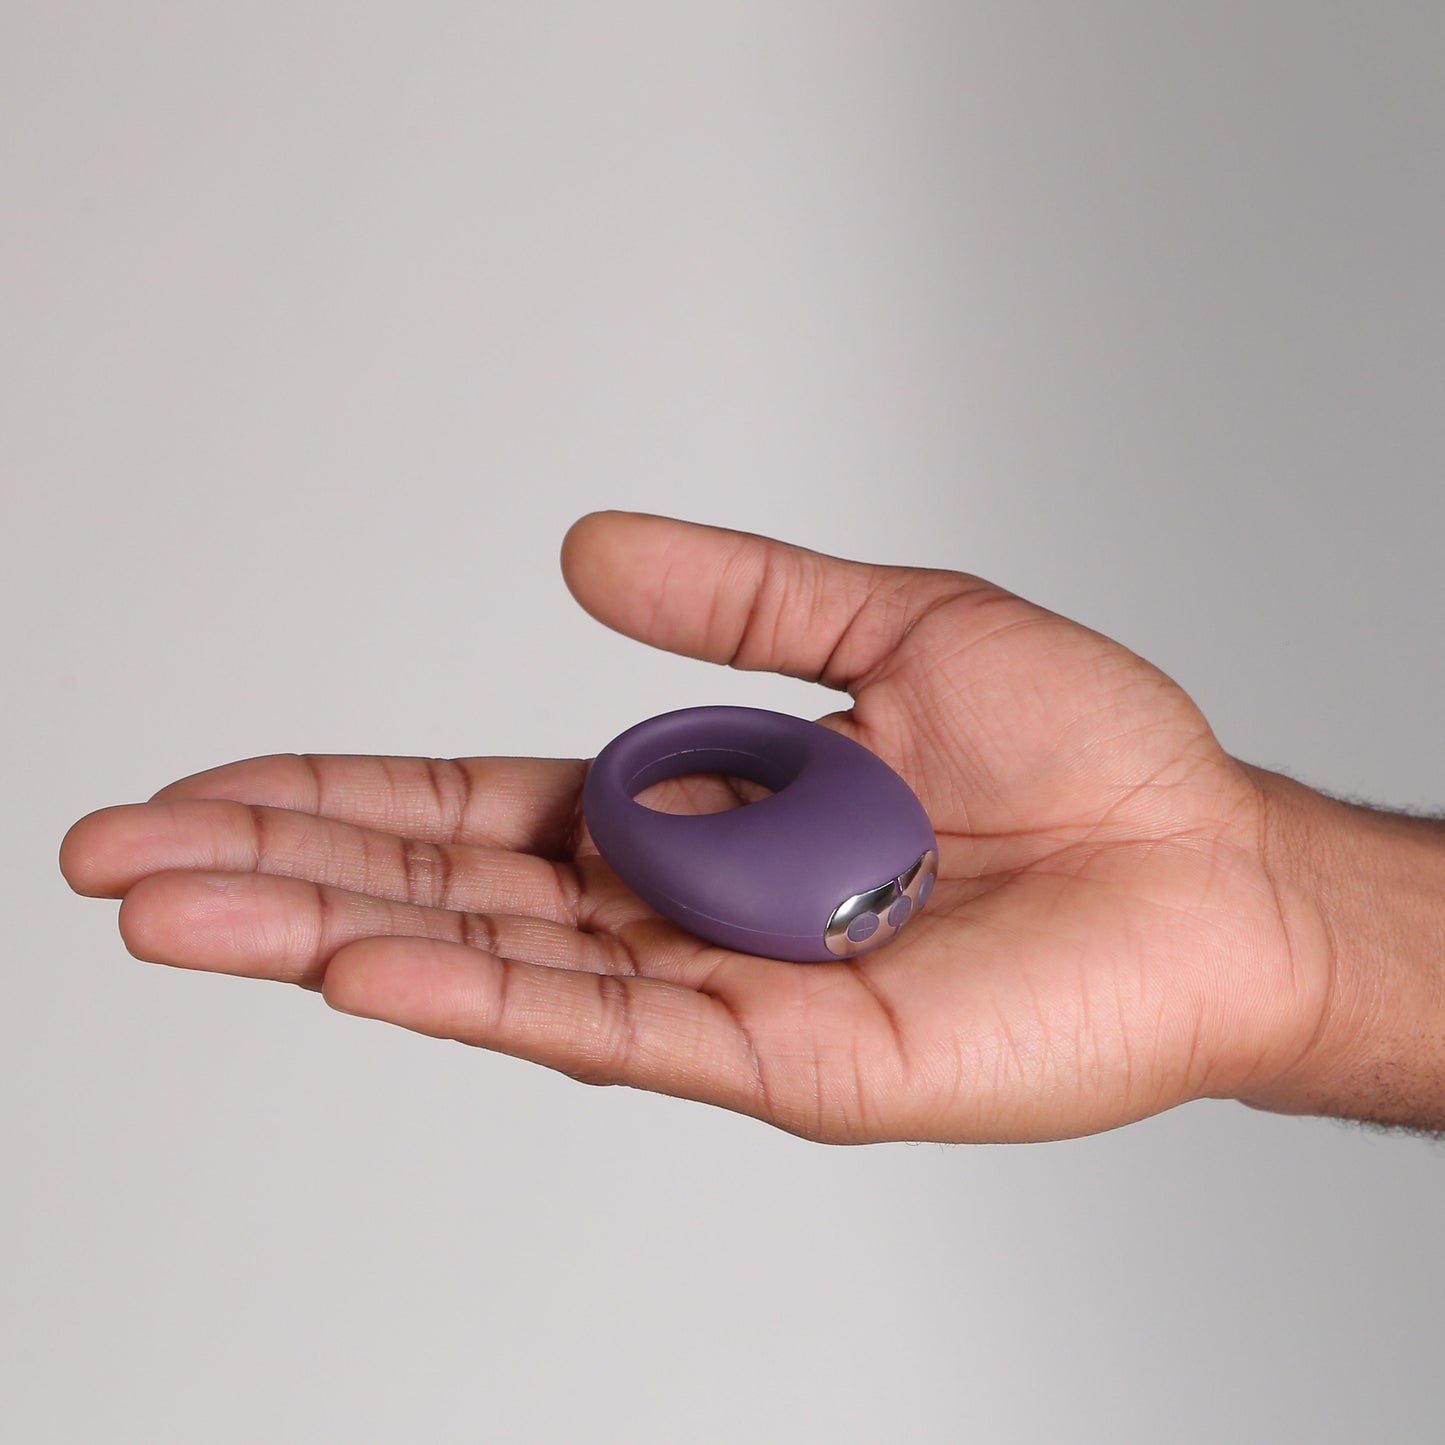 Mio Vibrating Cock Ring for Mutual Pleasure - Best Selling